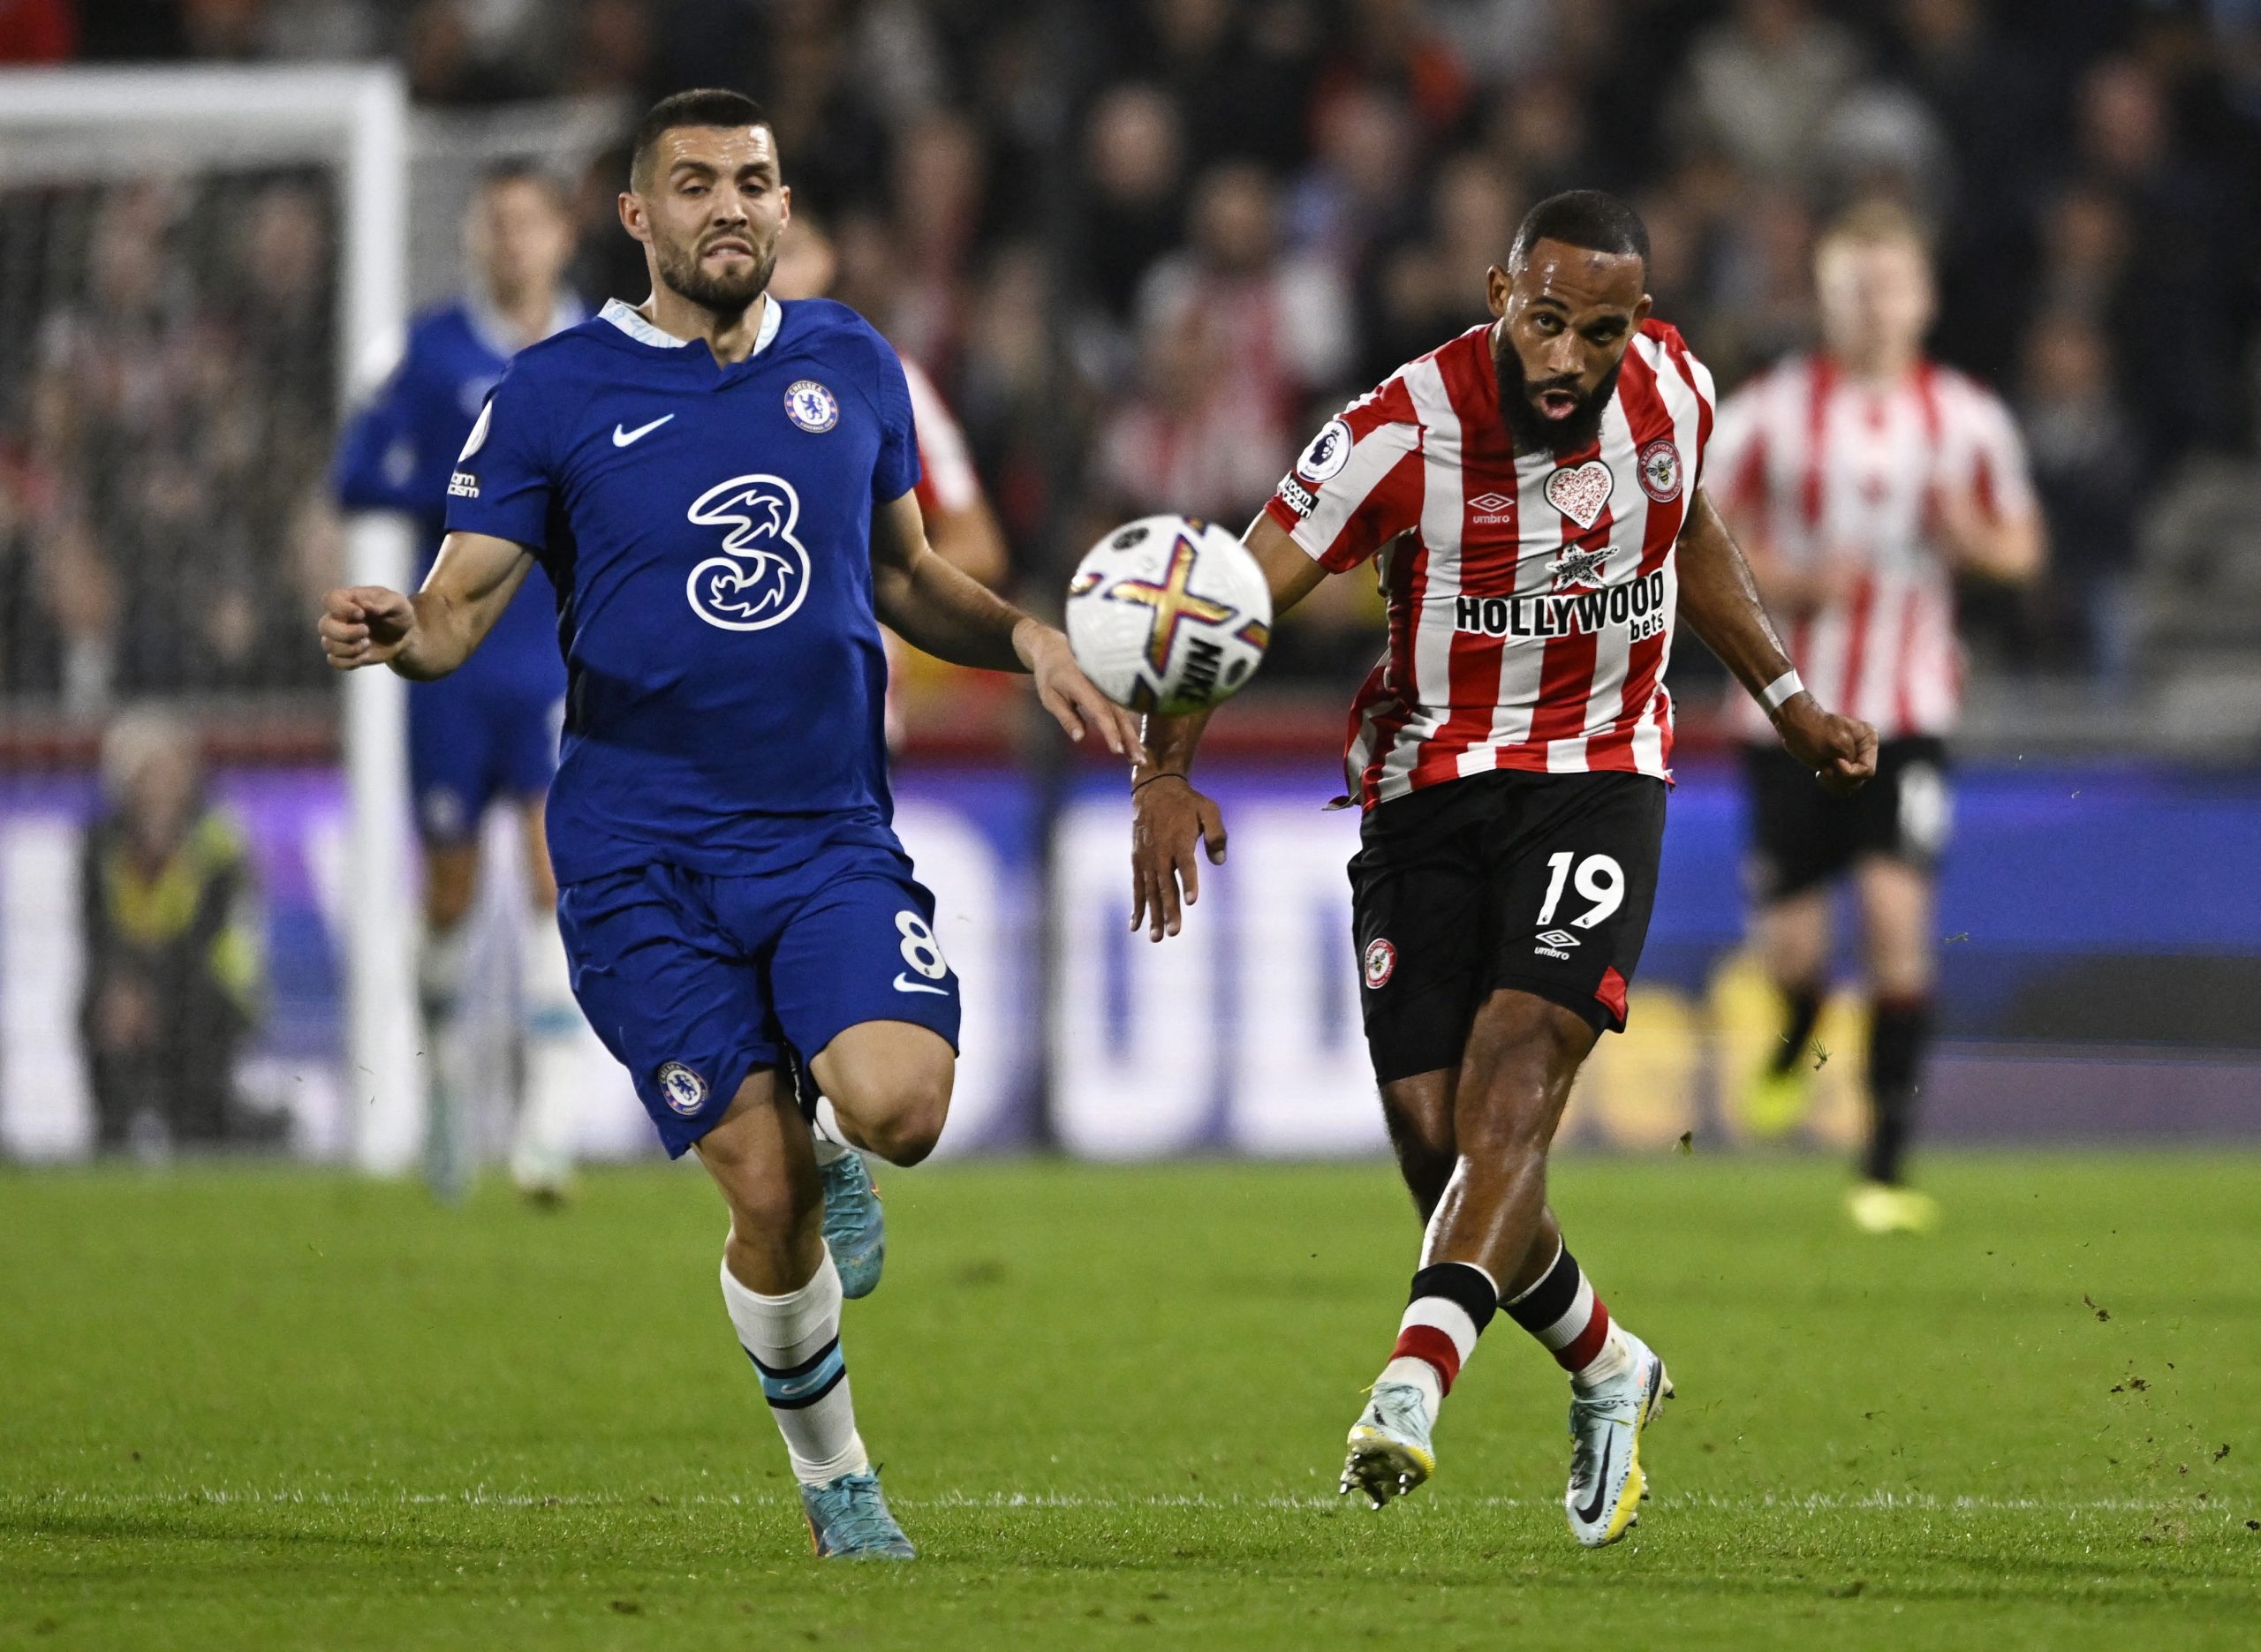 Brentford's Bryan Mbeumo in action with Chelsea's Mateo Kovacic